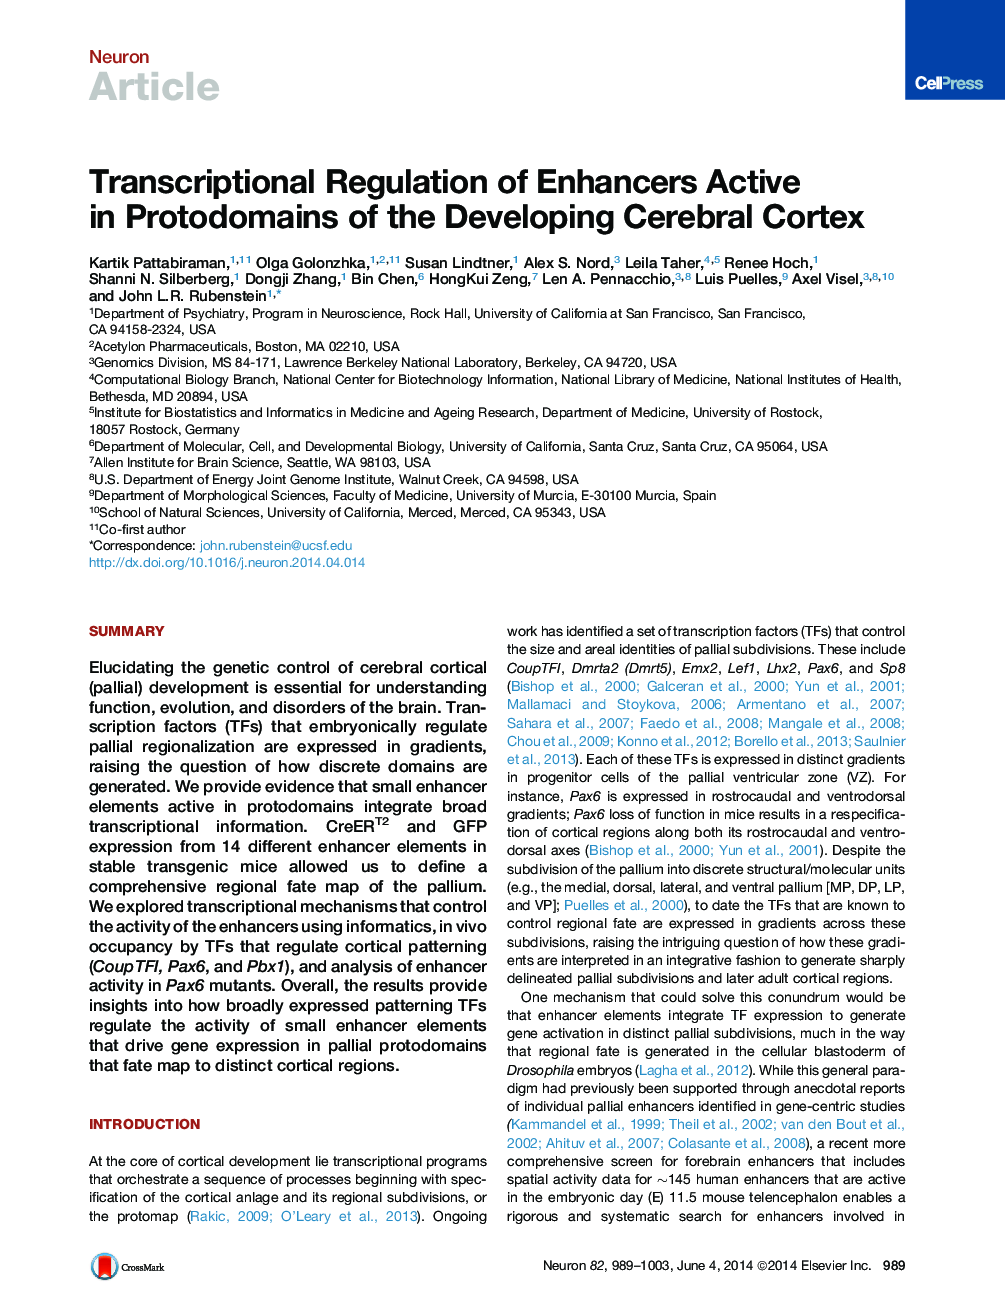 Transcriptional Regulation of Enhancers Active in Protodomains of the Developing Cerebral Cortex